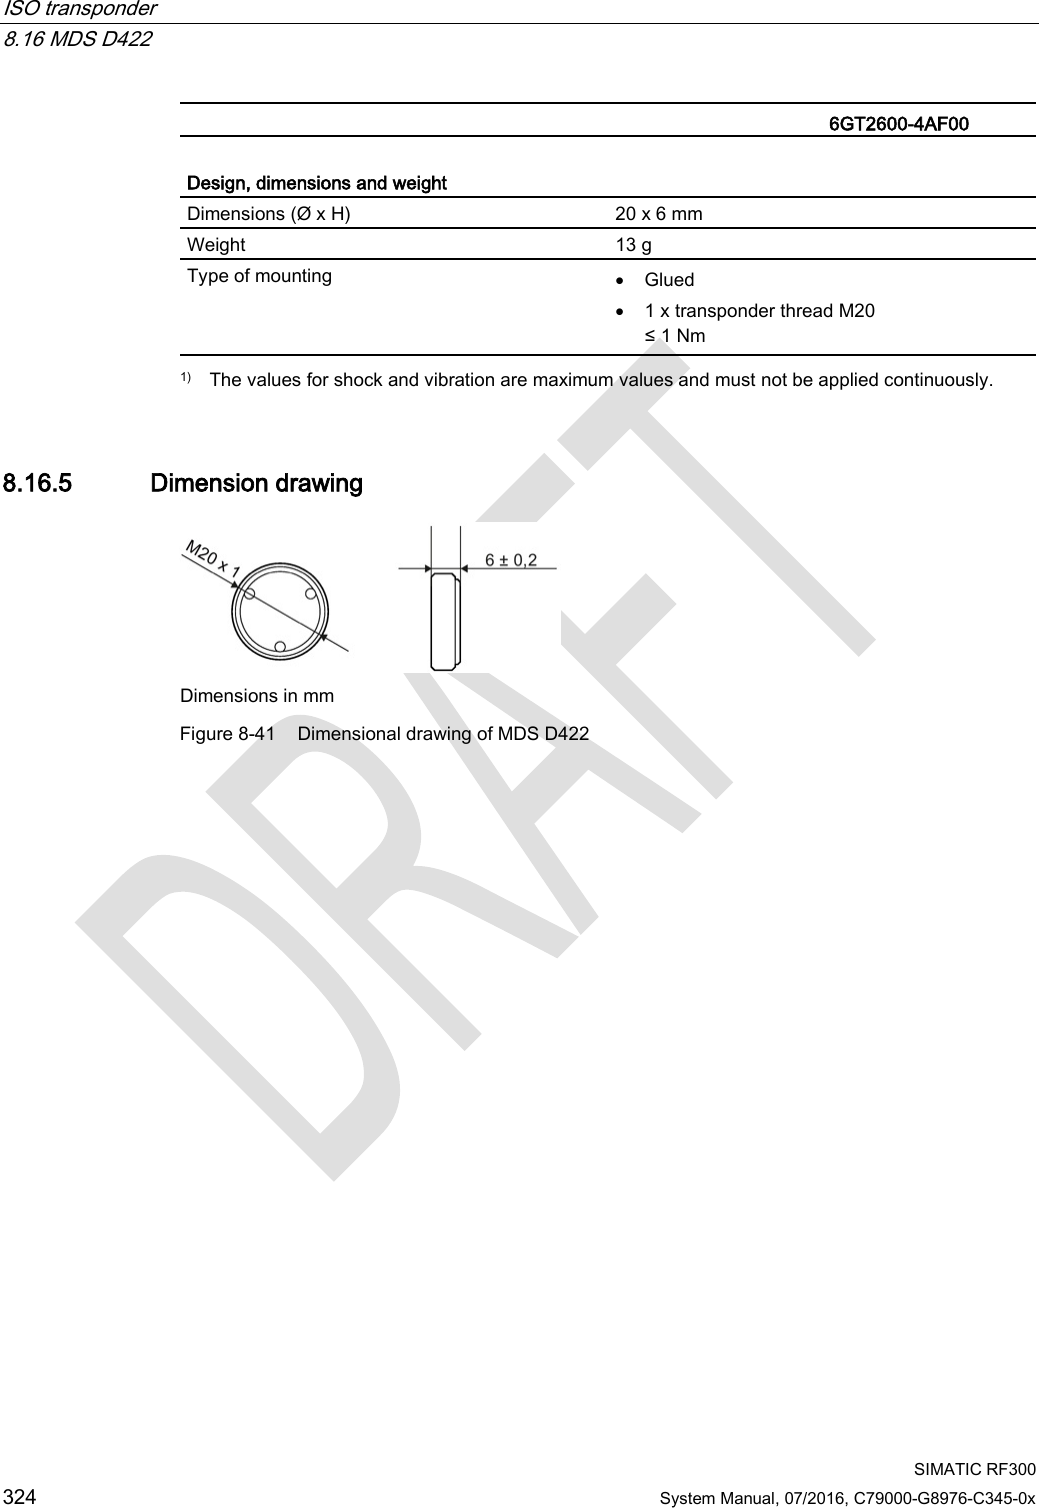 ISO transponder   8.16 MDS D422  SIMATIC RF300 324 System Manual, 07/2016, C79000-G8976-C345-0x   6GT2600-4AF00   Design, dimensions and weight  Dimensions (Ø x H) 20 x 6 mm Weight 13 g Type of mounting • Glued • 1 x transponder thread M20 ≤ 1 Nm  1) The values for shock and vibration are maximum values and must not be applied continuously. 8.16.5 Dimension drawing  Dimensions in mm Figure 8-41 Dimensional drawing of MDS D422  